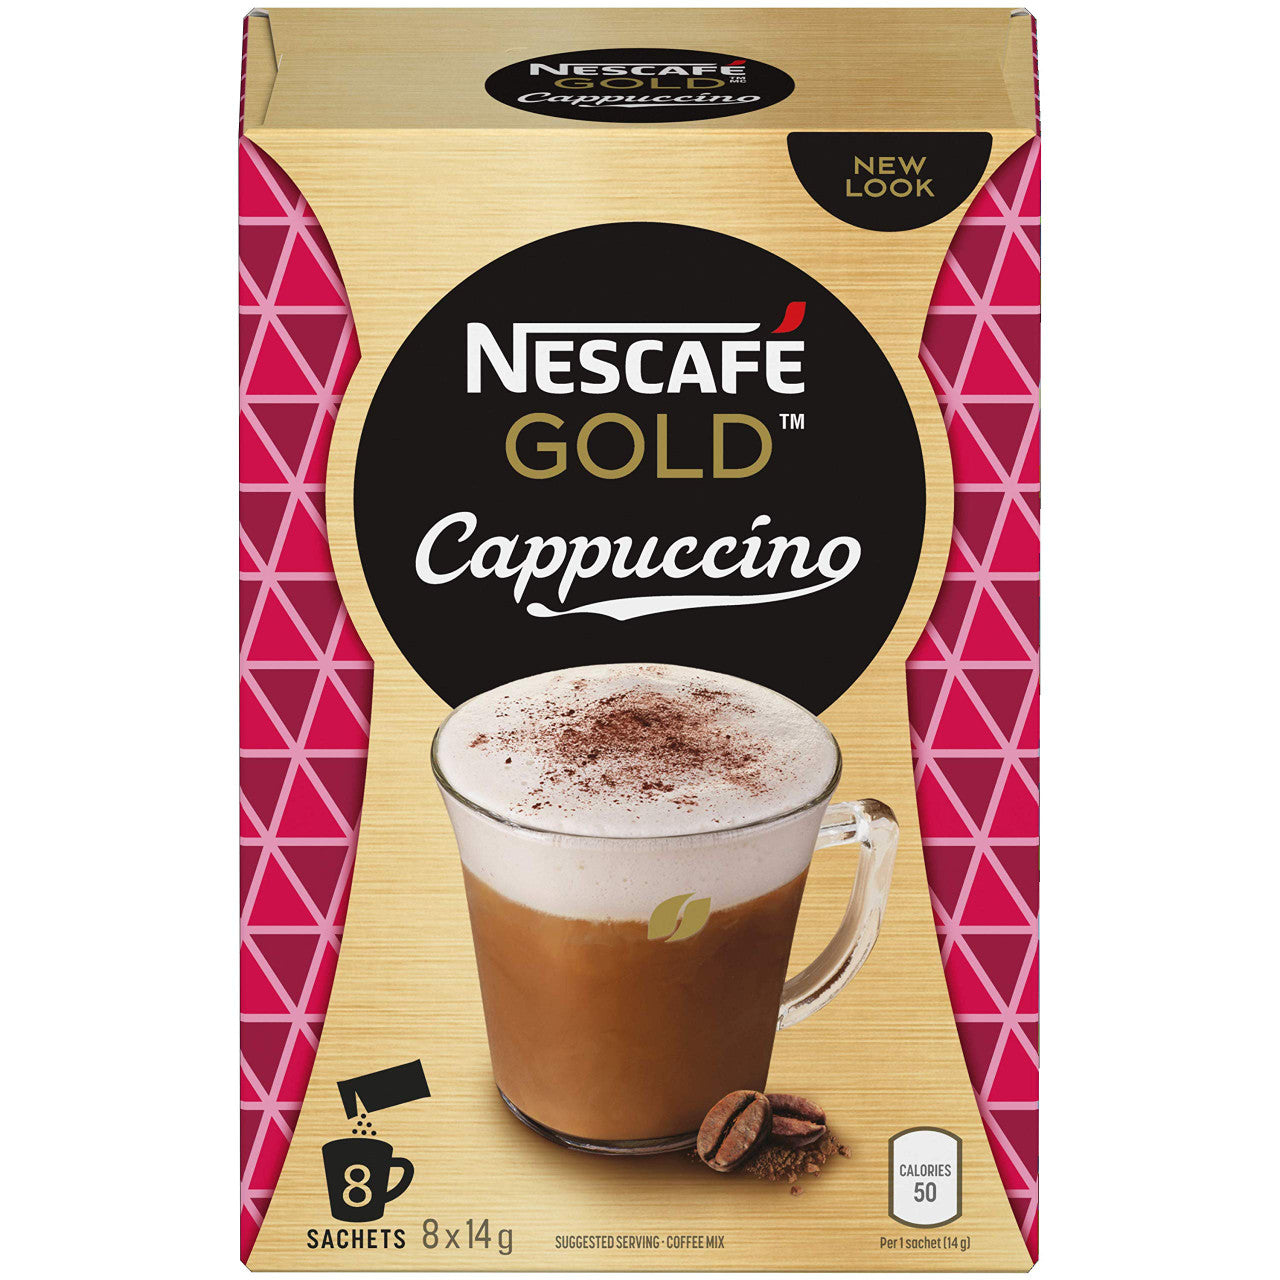 NESCAFE Cappuccino, Instant Coffee Sachets, 8x14g (Pack of 6, 48 Cups)